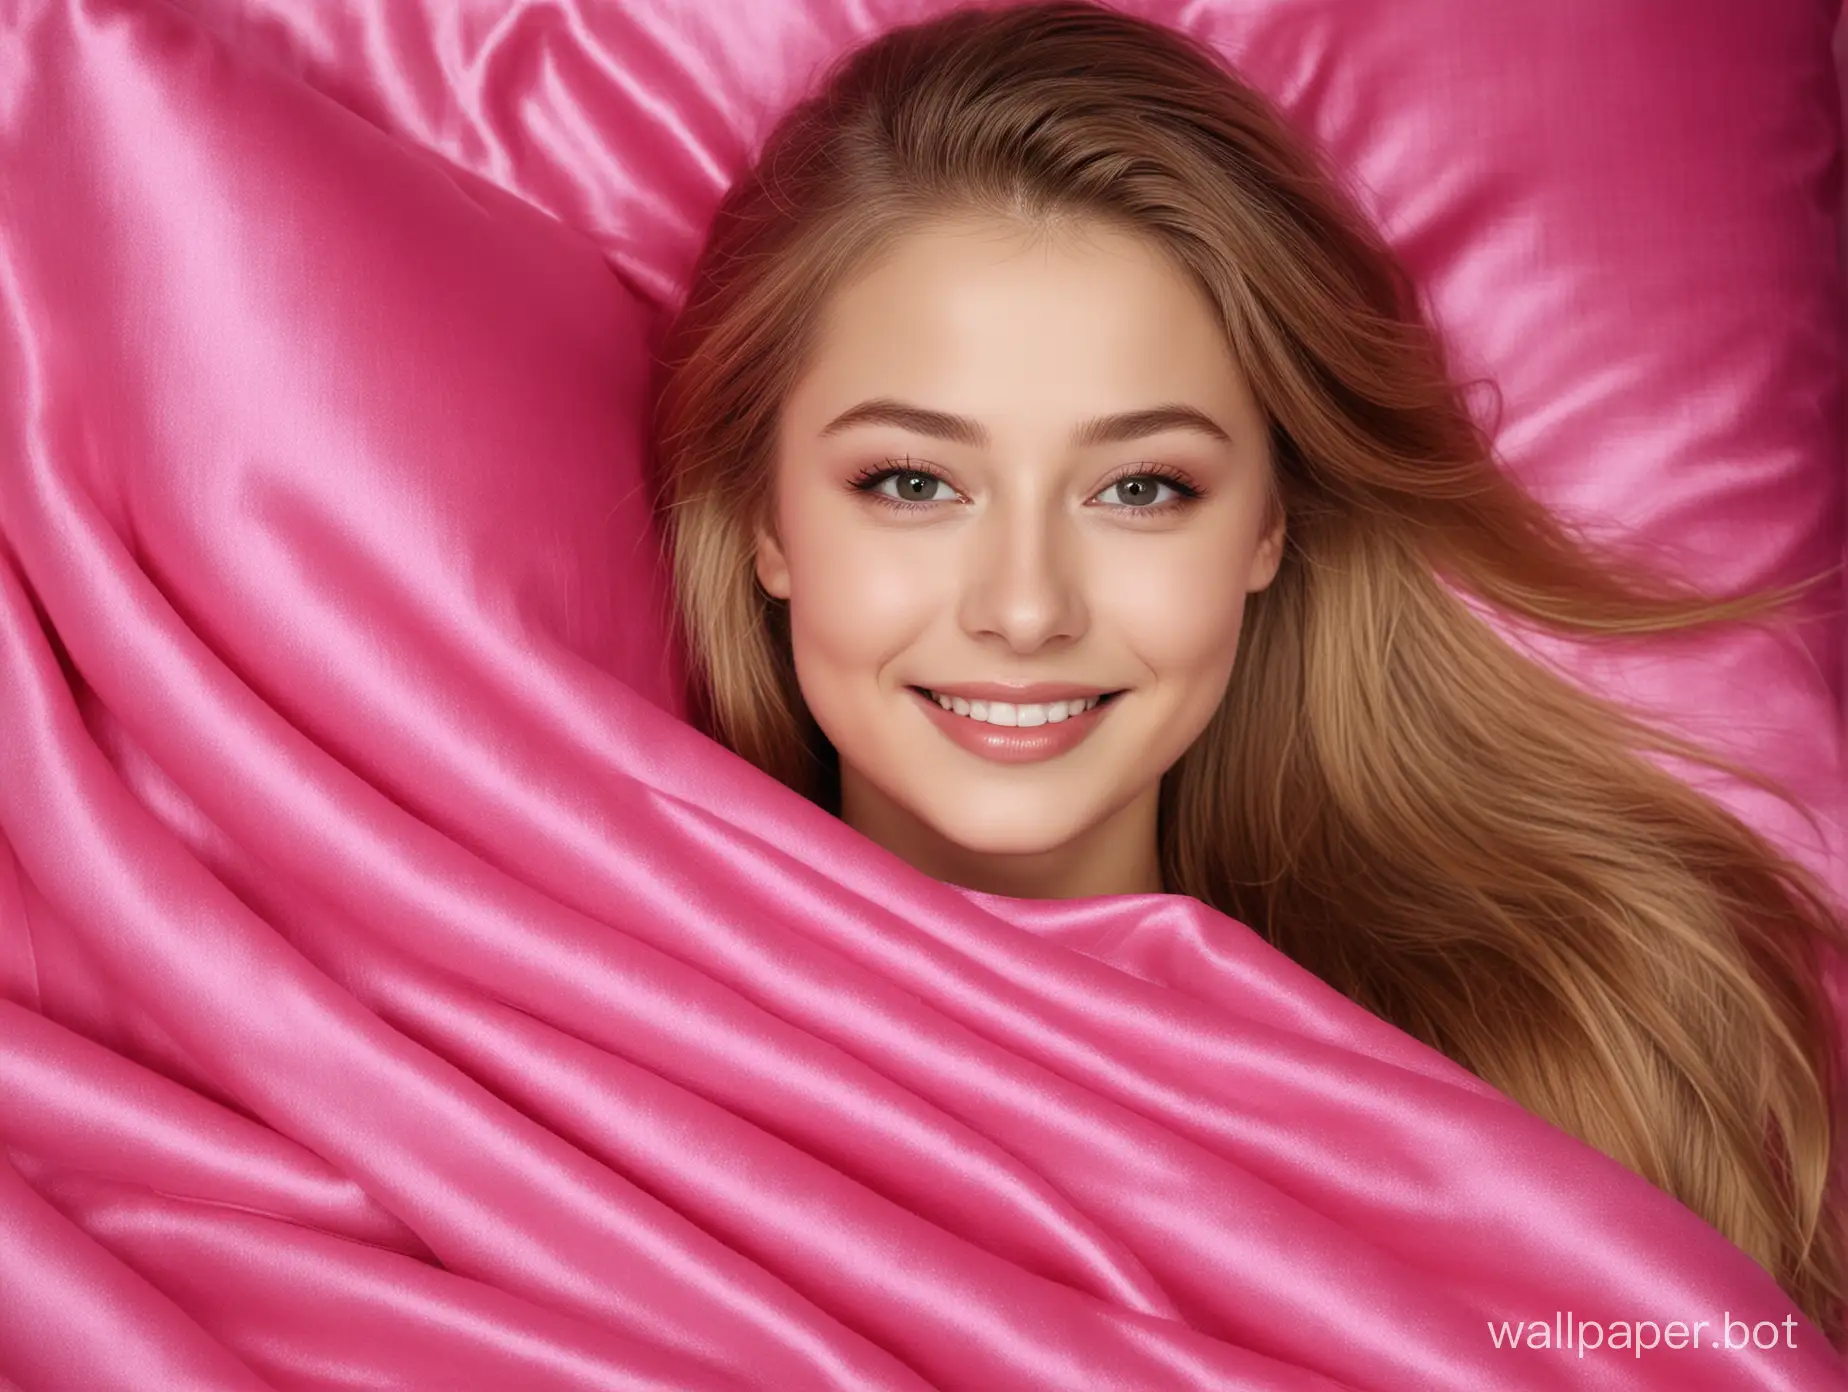 Sweet Yulia Lipnitskaya smiles with long straight silky hair in long Beautiful, gentle, Luxurious glamour natural hot pink fuchsia mulberry silk blanket and pillow